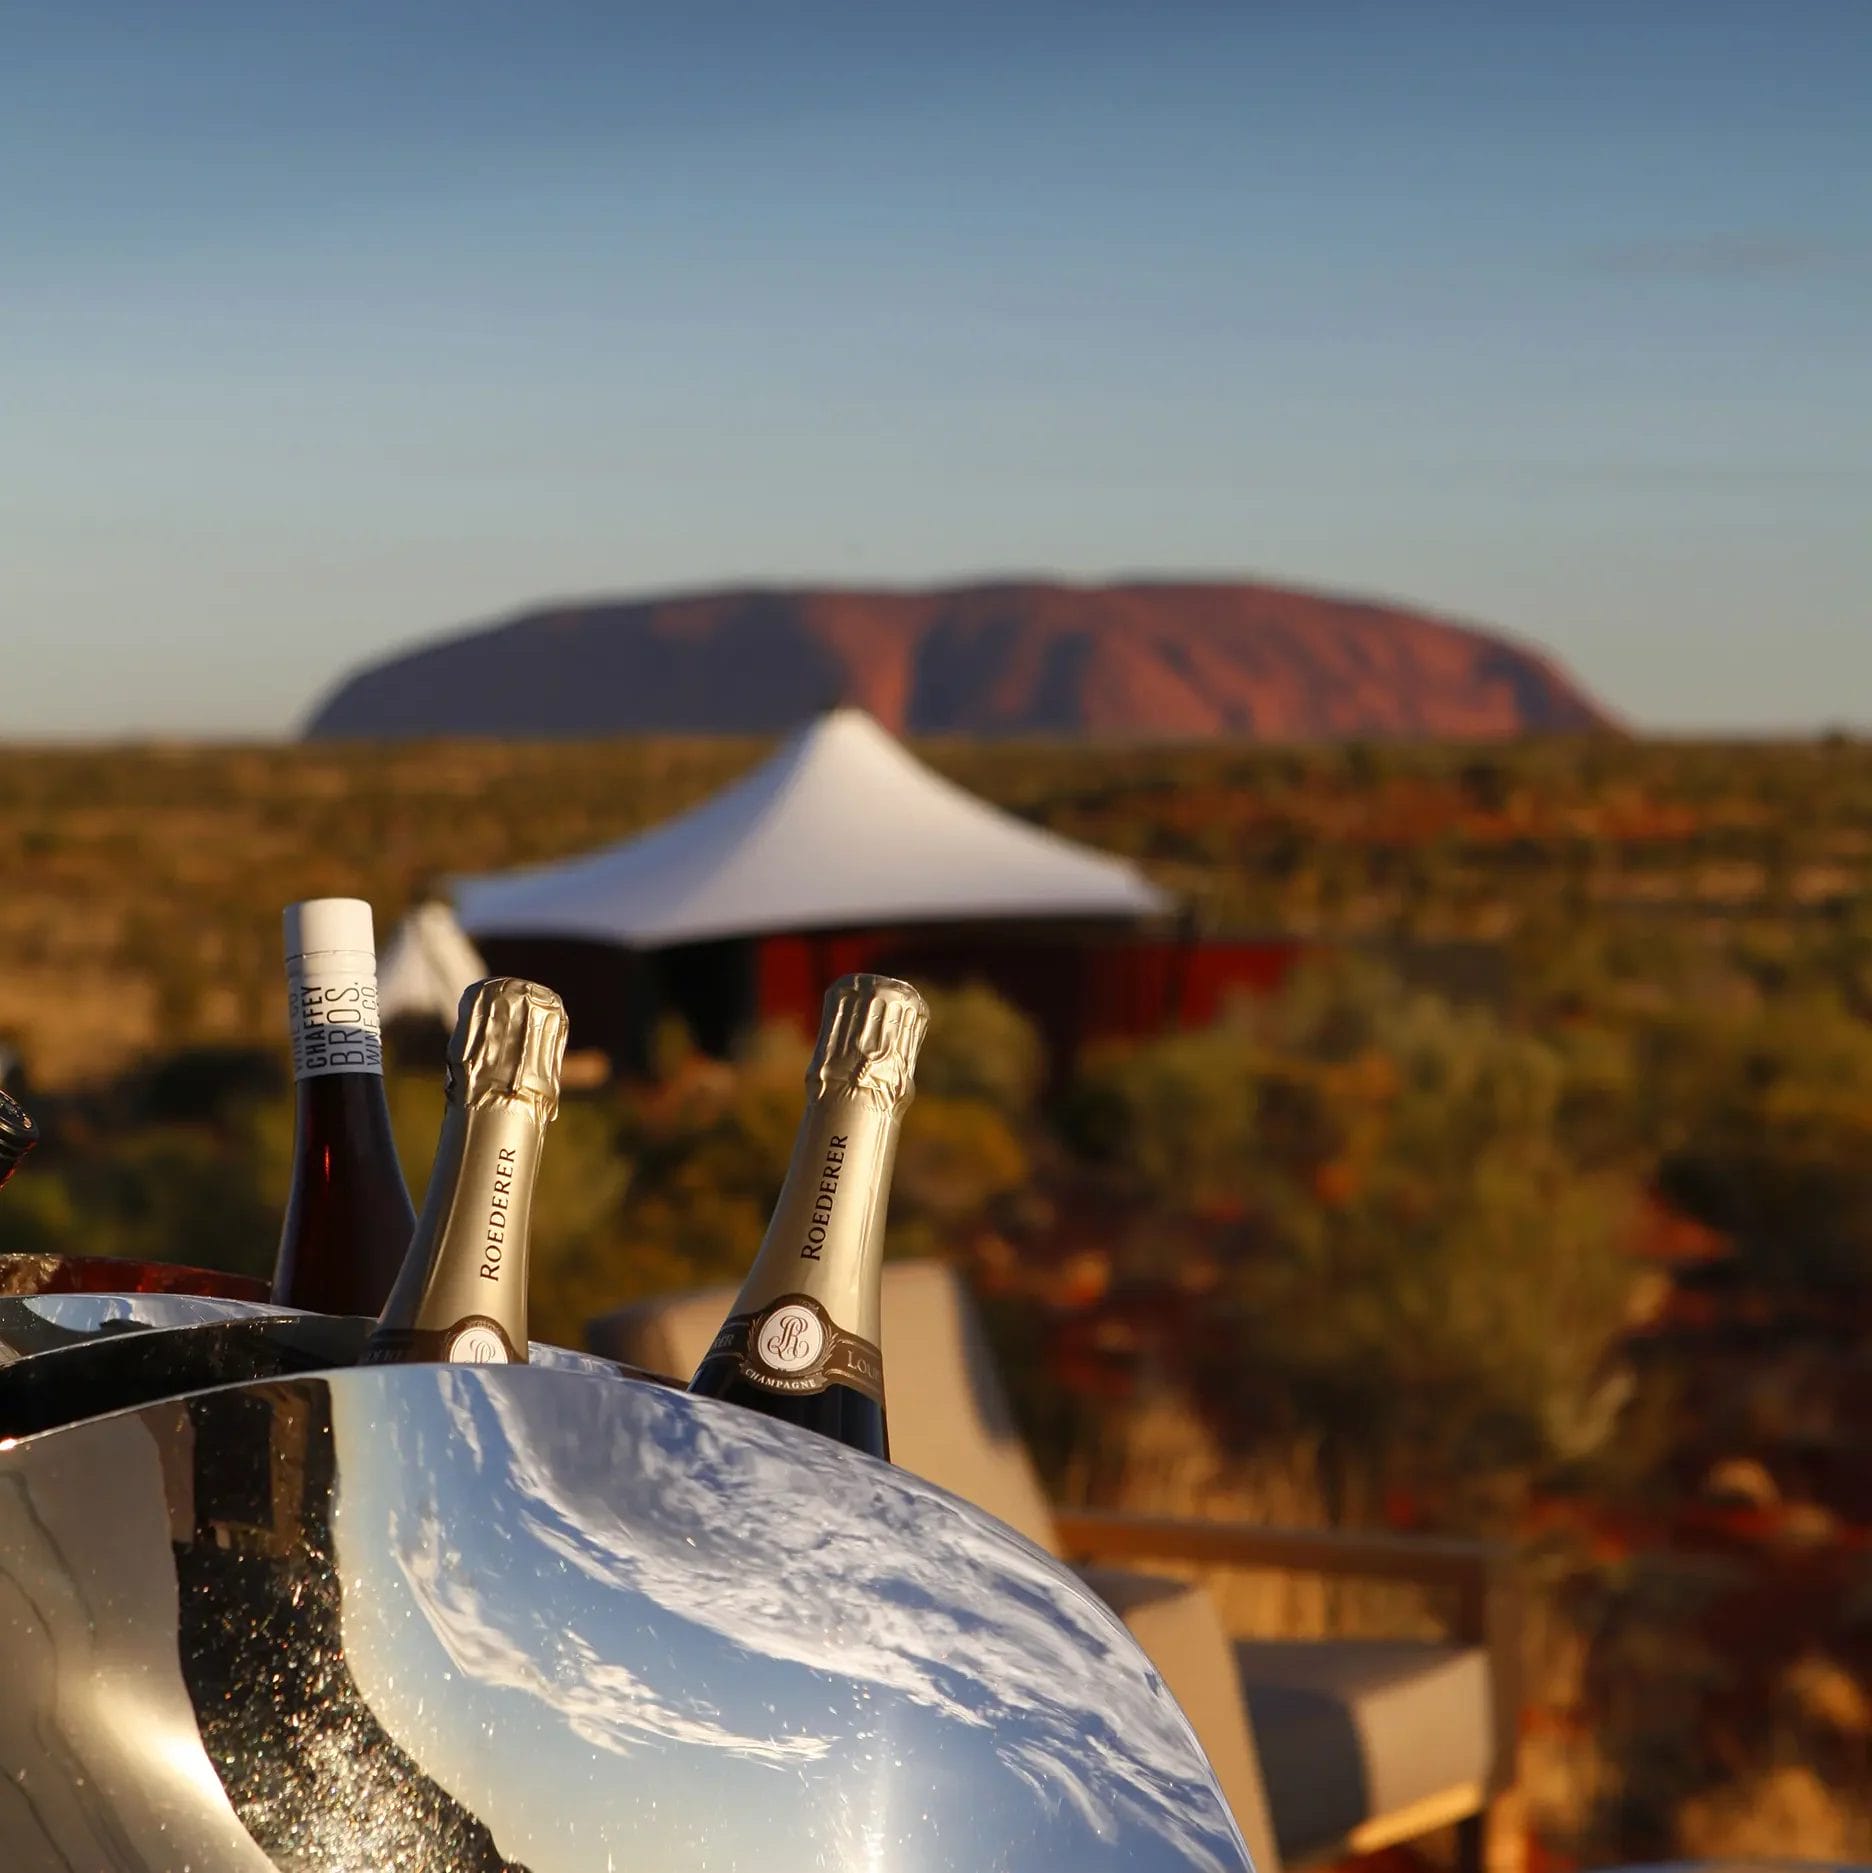 Bottles of champagne in a wine cooler overlooking Uluru in the Northern Territory